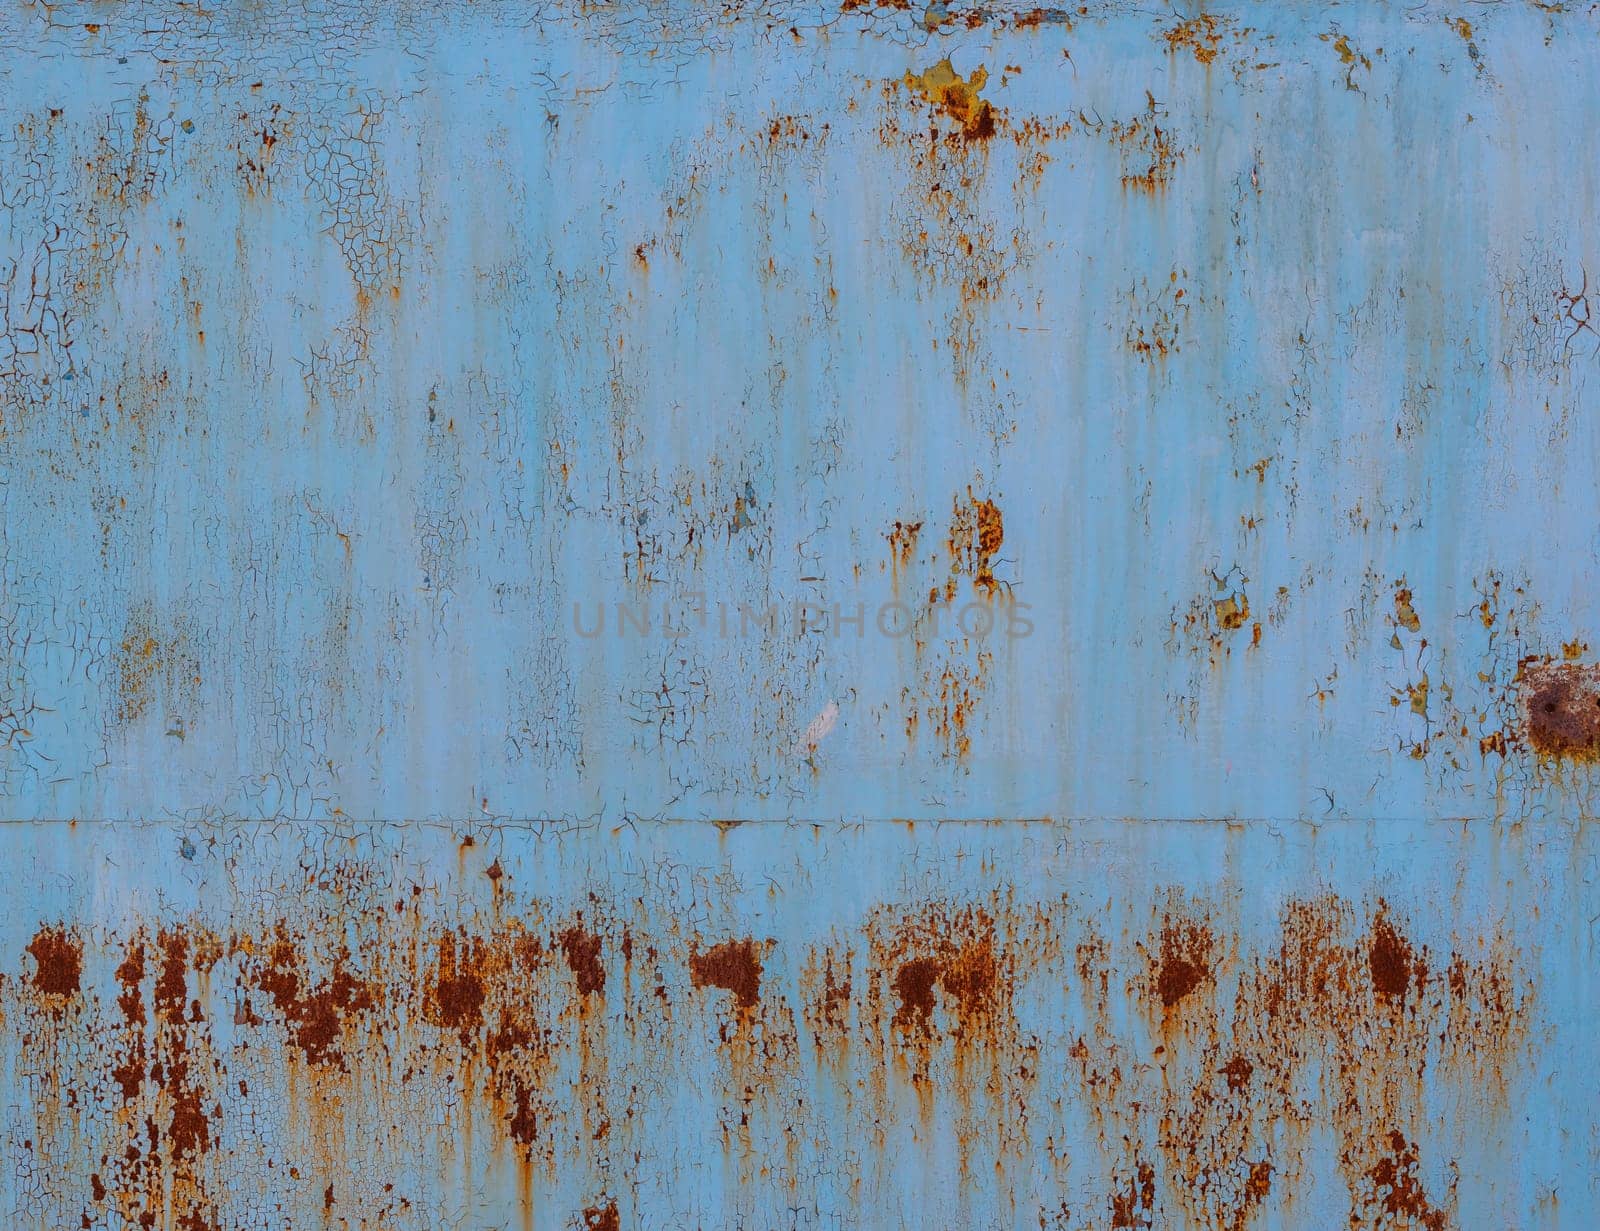 faded blue paint on flat sheet steel surface with stains of rust - full-frame background and texture by z1b